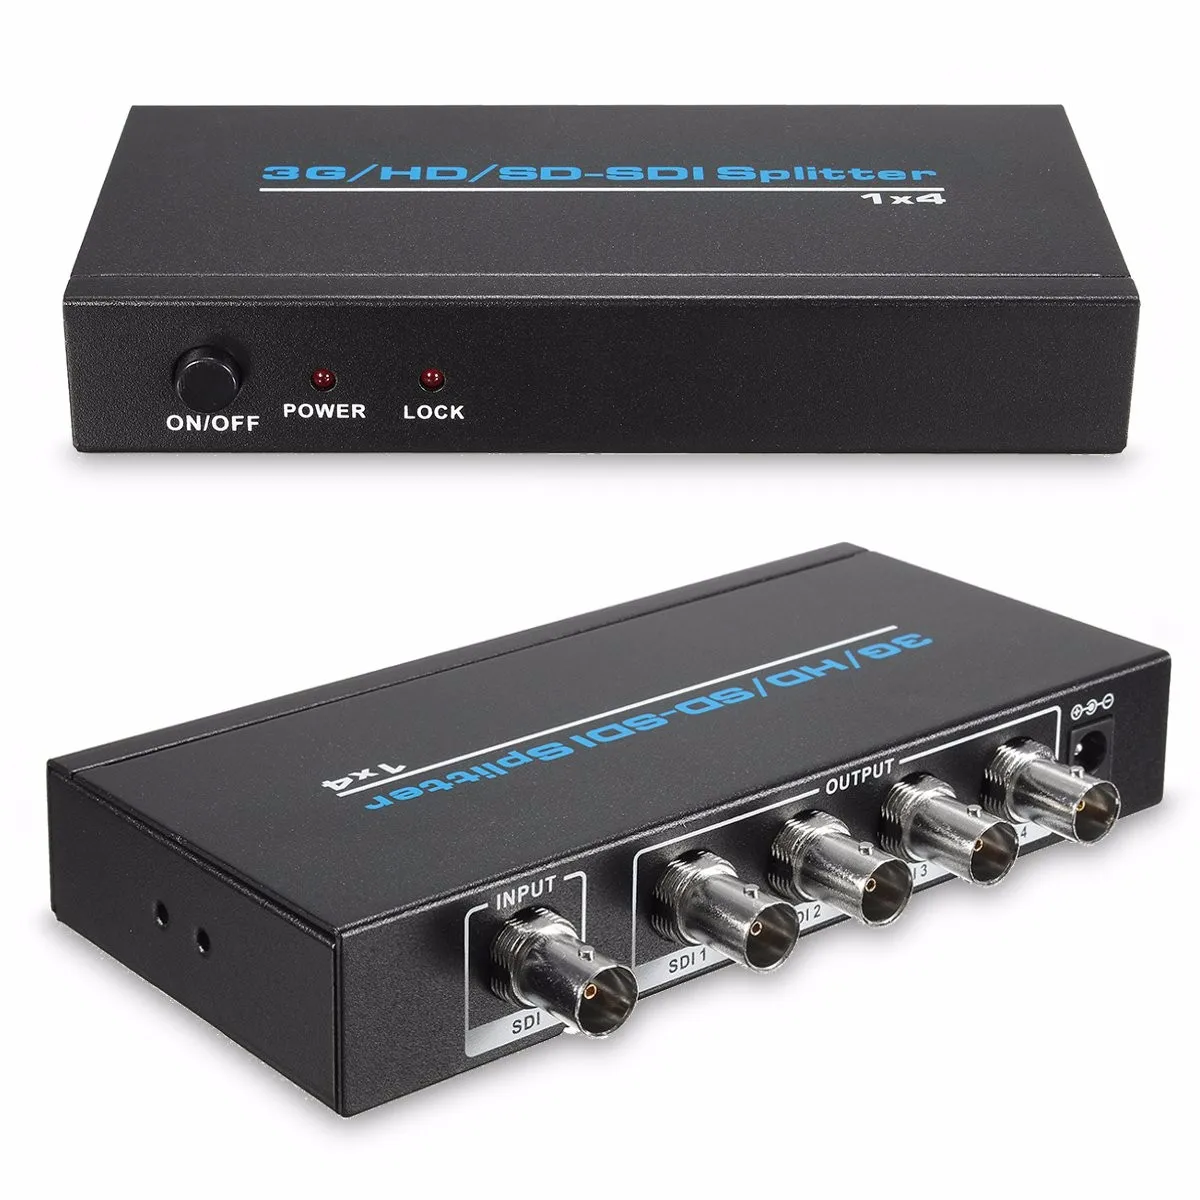 

1x4 3G/HD/SD-SDI Video Splitter BNC 1 In 4 Out Distributor 1920*1080p for HDTV Switcher